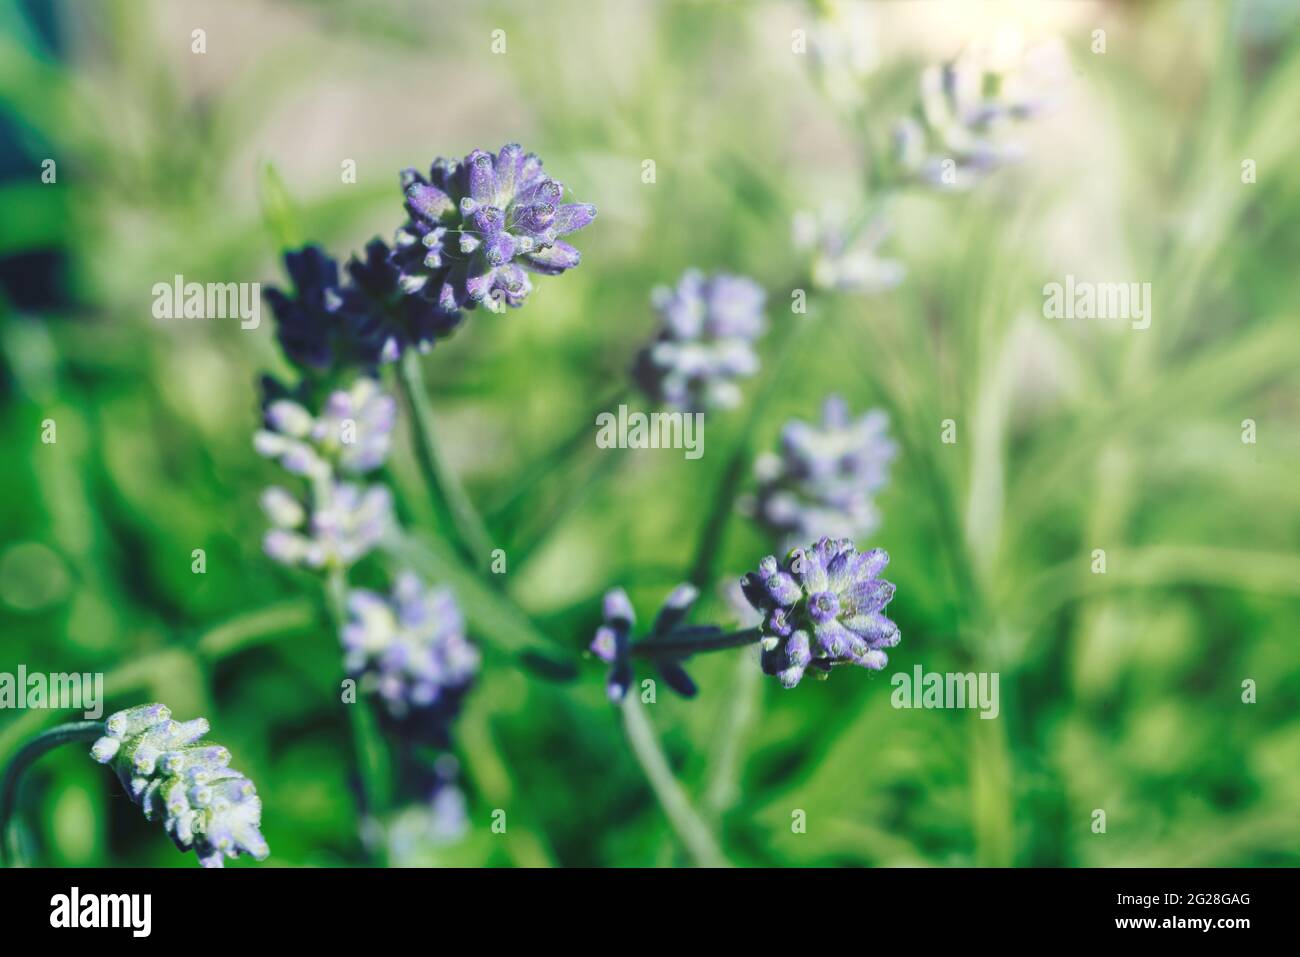 close-up of purple lavender flowers against defocused green background Stock Photo